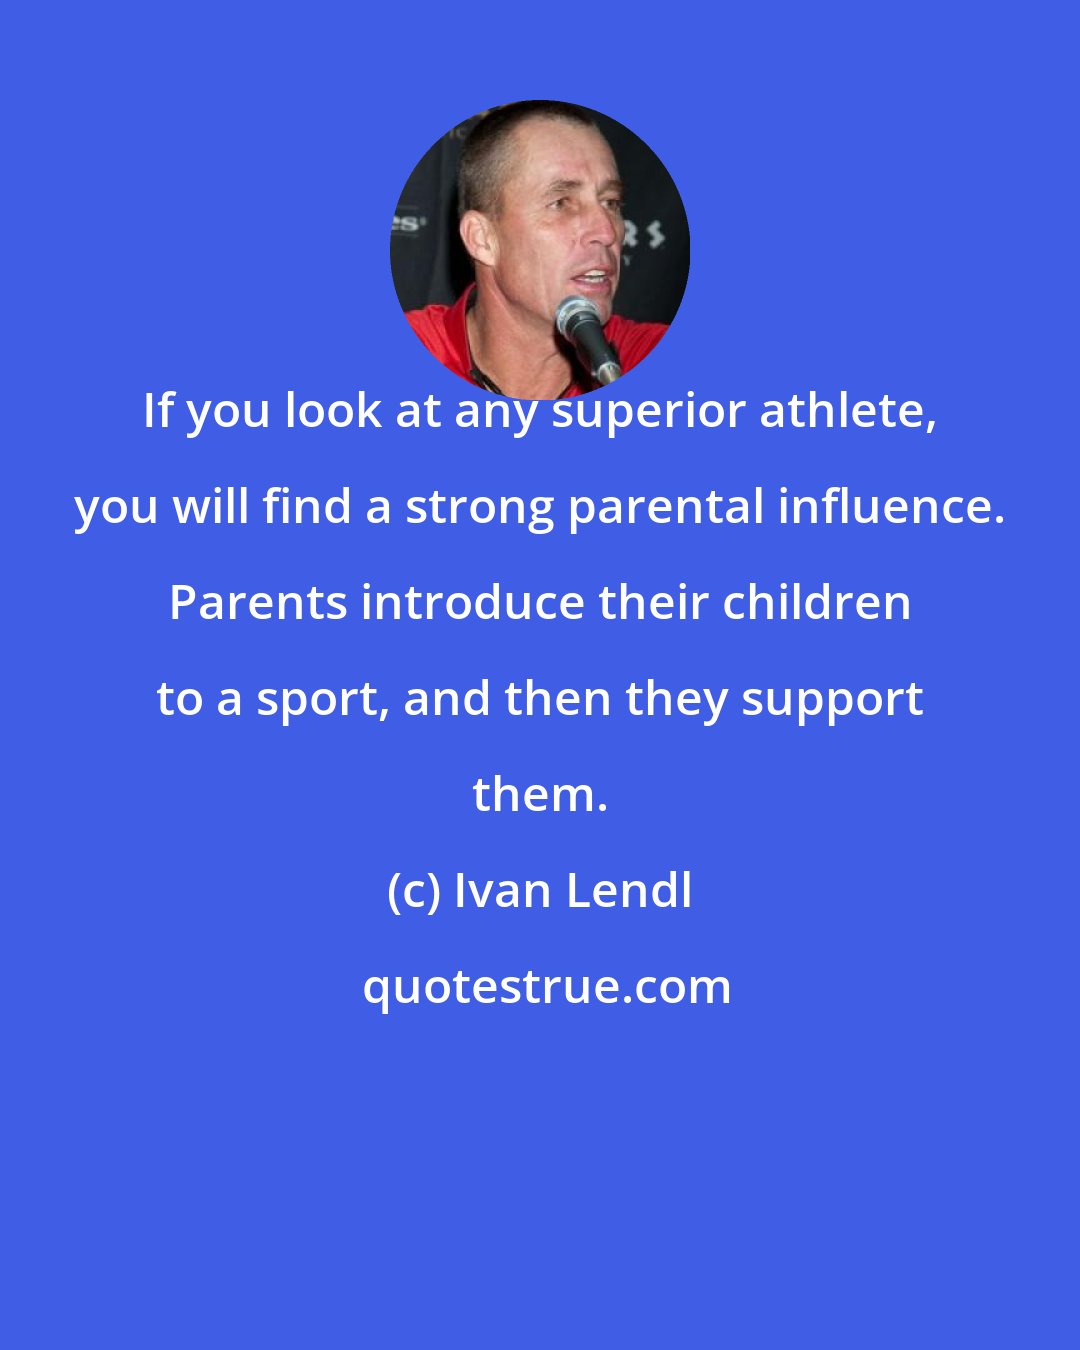 Ivan Lendl: If you look at any superior athlete, you will find a strong parental influence. Parents introduce their children to a sport, and then they support them.